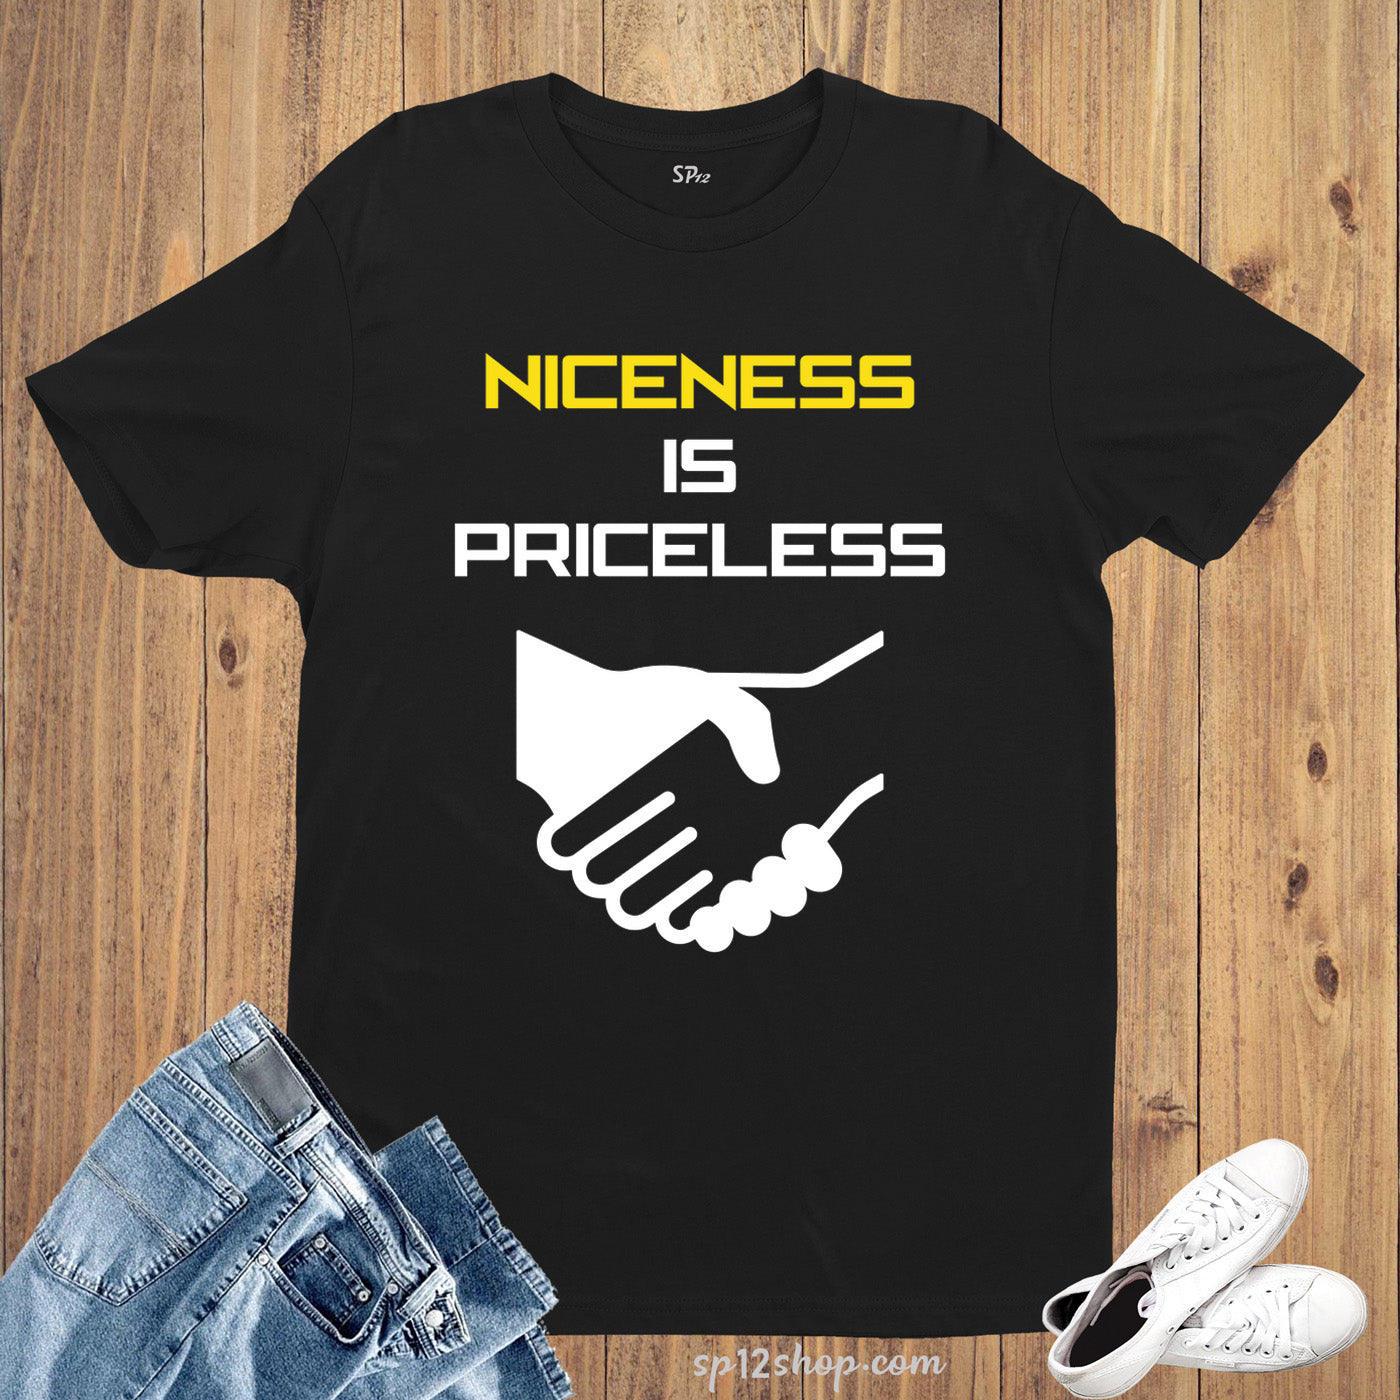 Niceness Is Priceless Life Lesson Slogan T Shirt